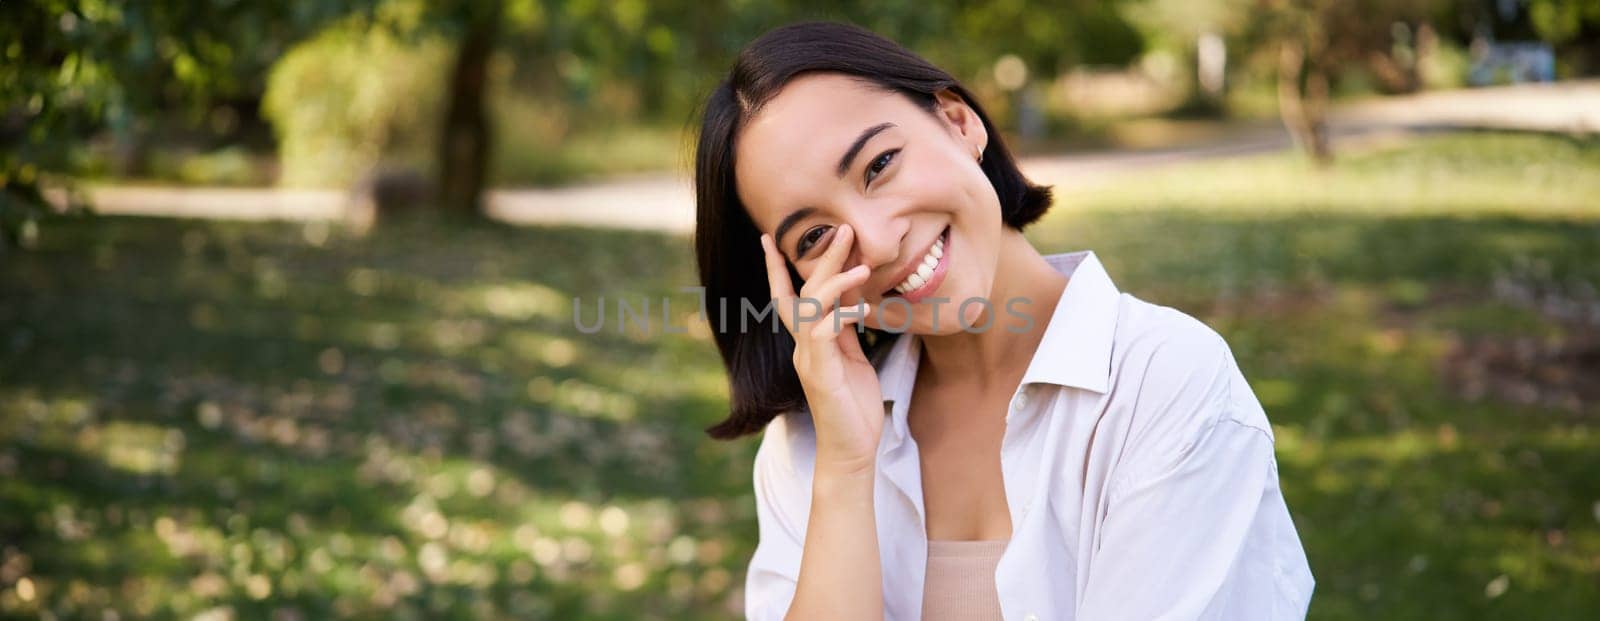 Beautiful young asian girl smiling, laughing and walking along park, enjoying summer sunny day. People and lifestyle concept